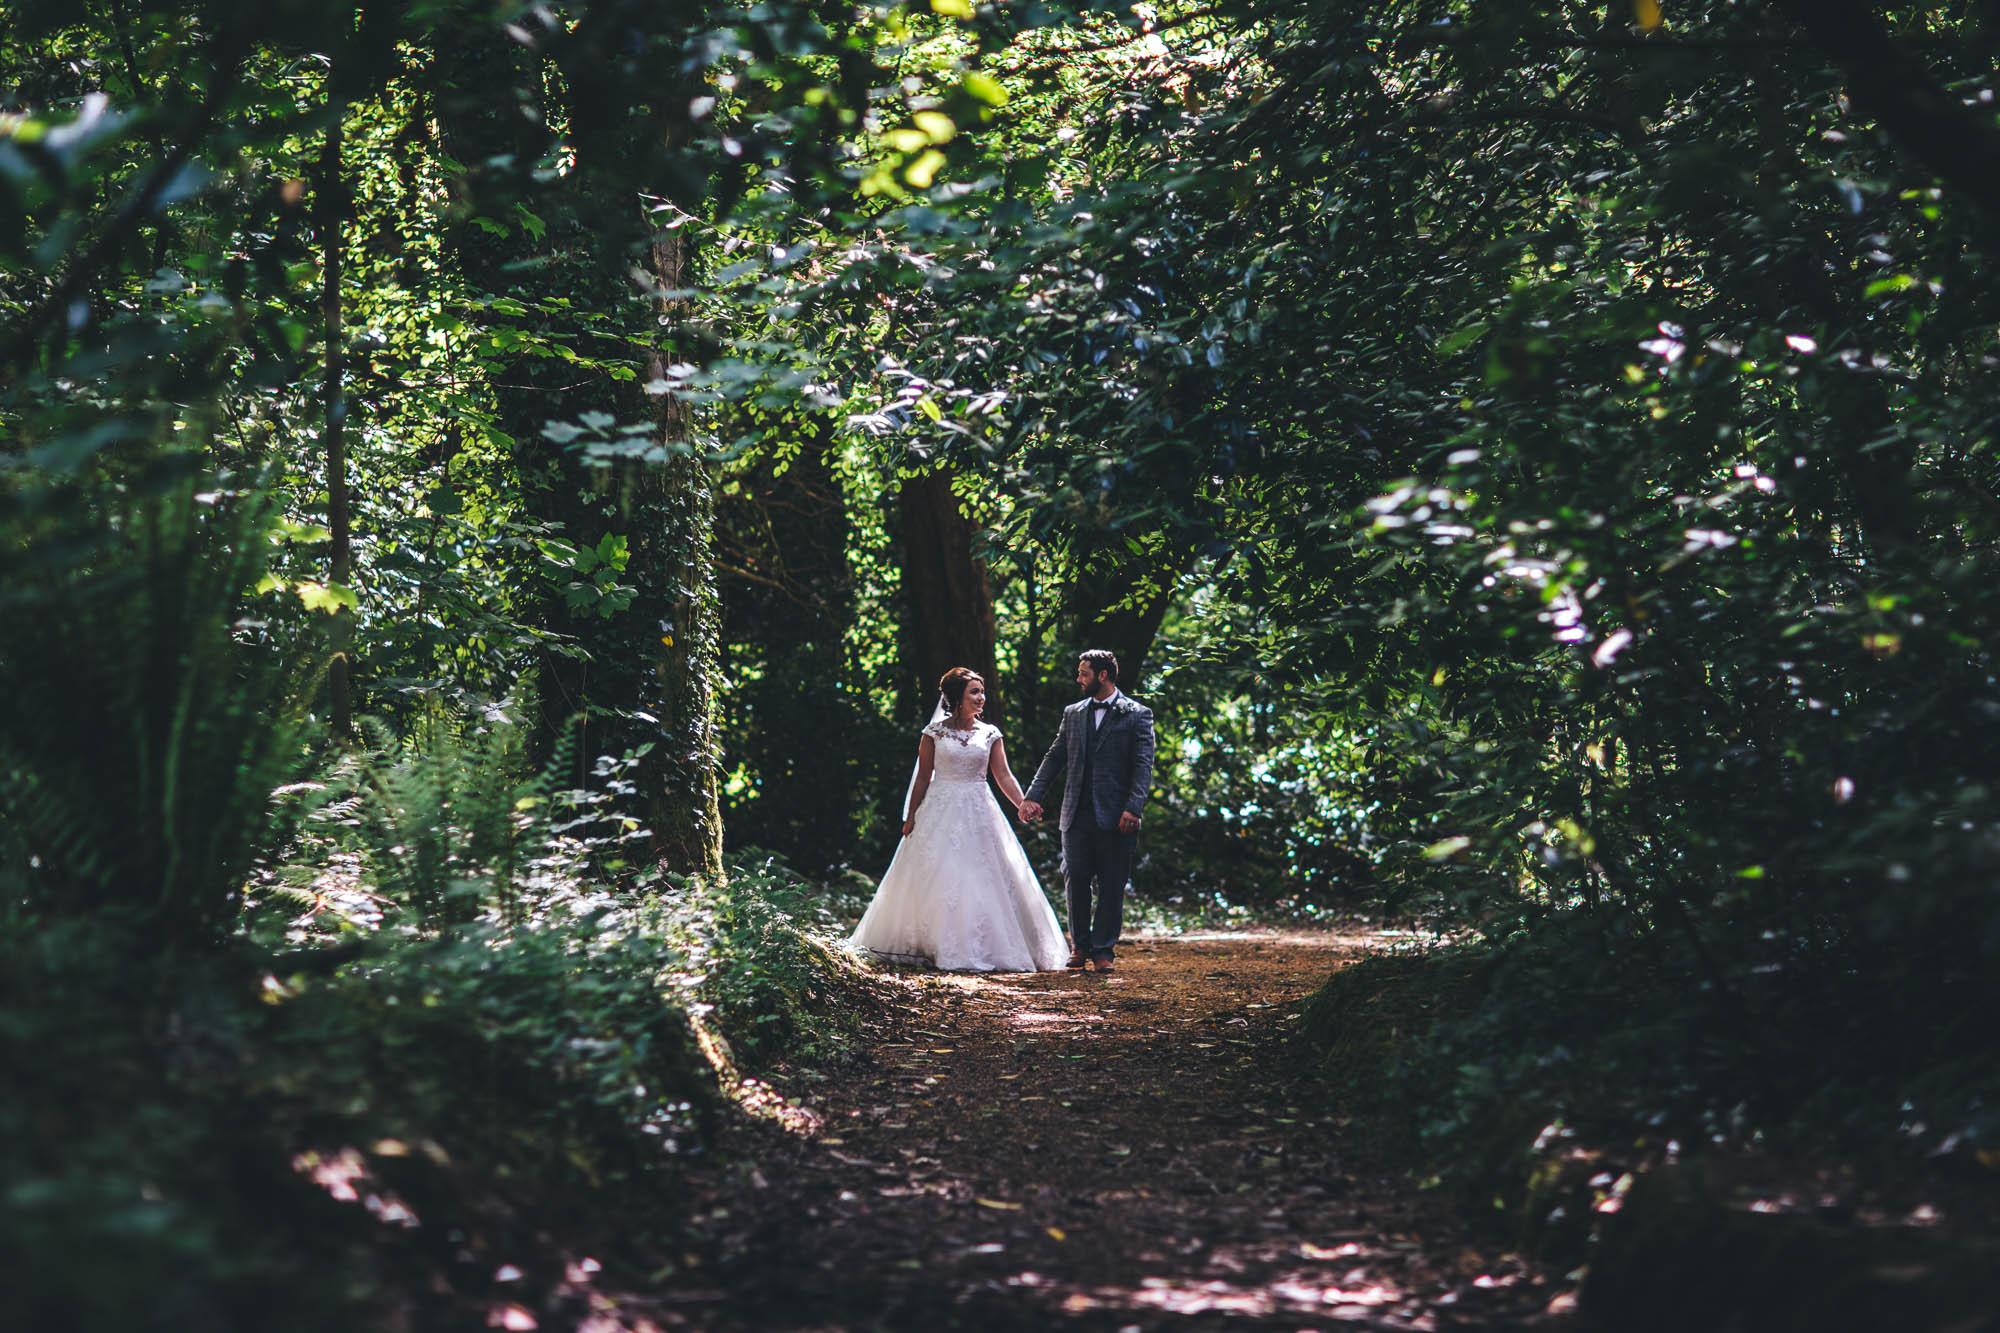 Vivid green shot of just married couple in the distance walking through trees and woodland